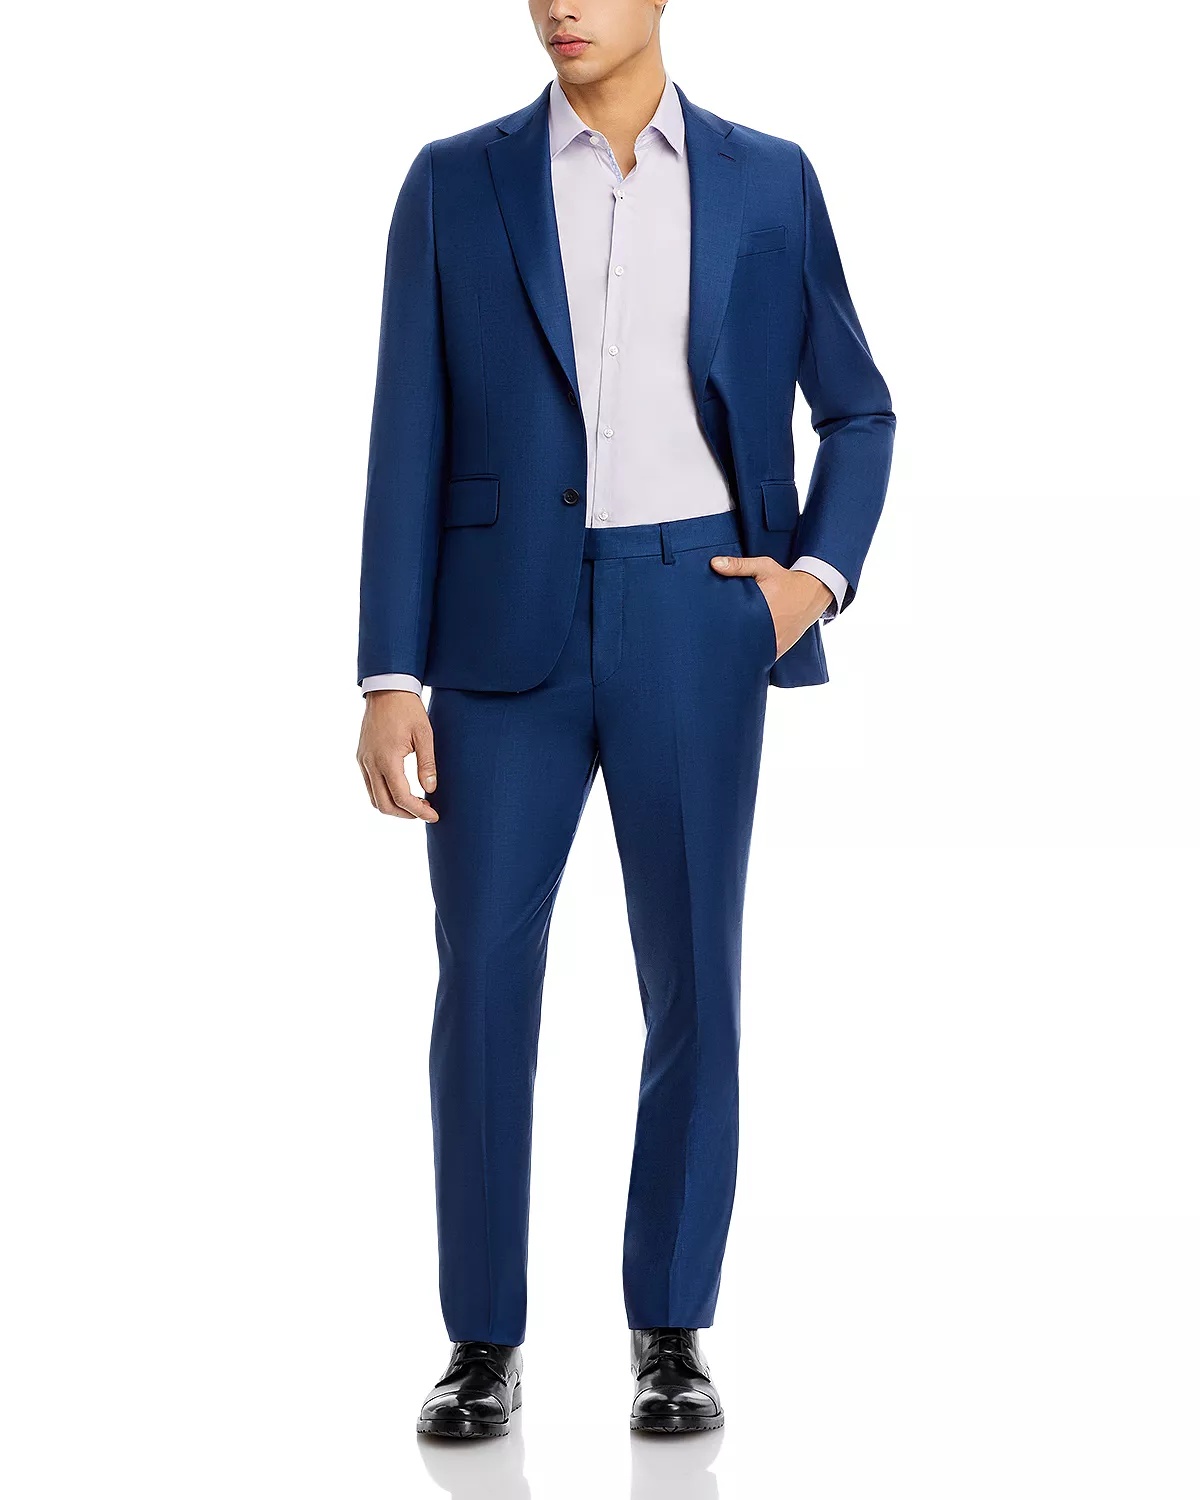 Brierly Sharkskin Tailored Fit Two Button Suit - 7